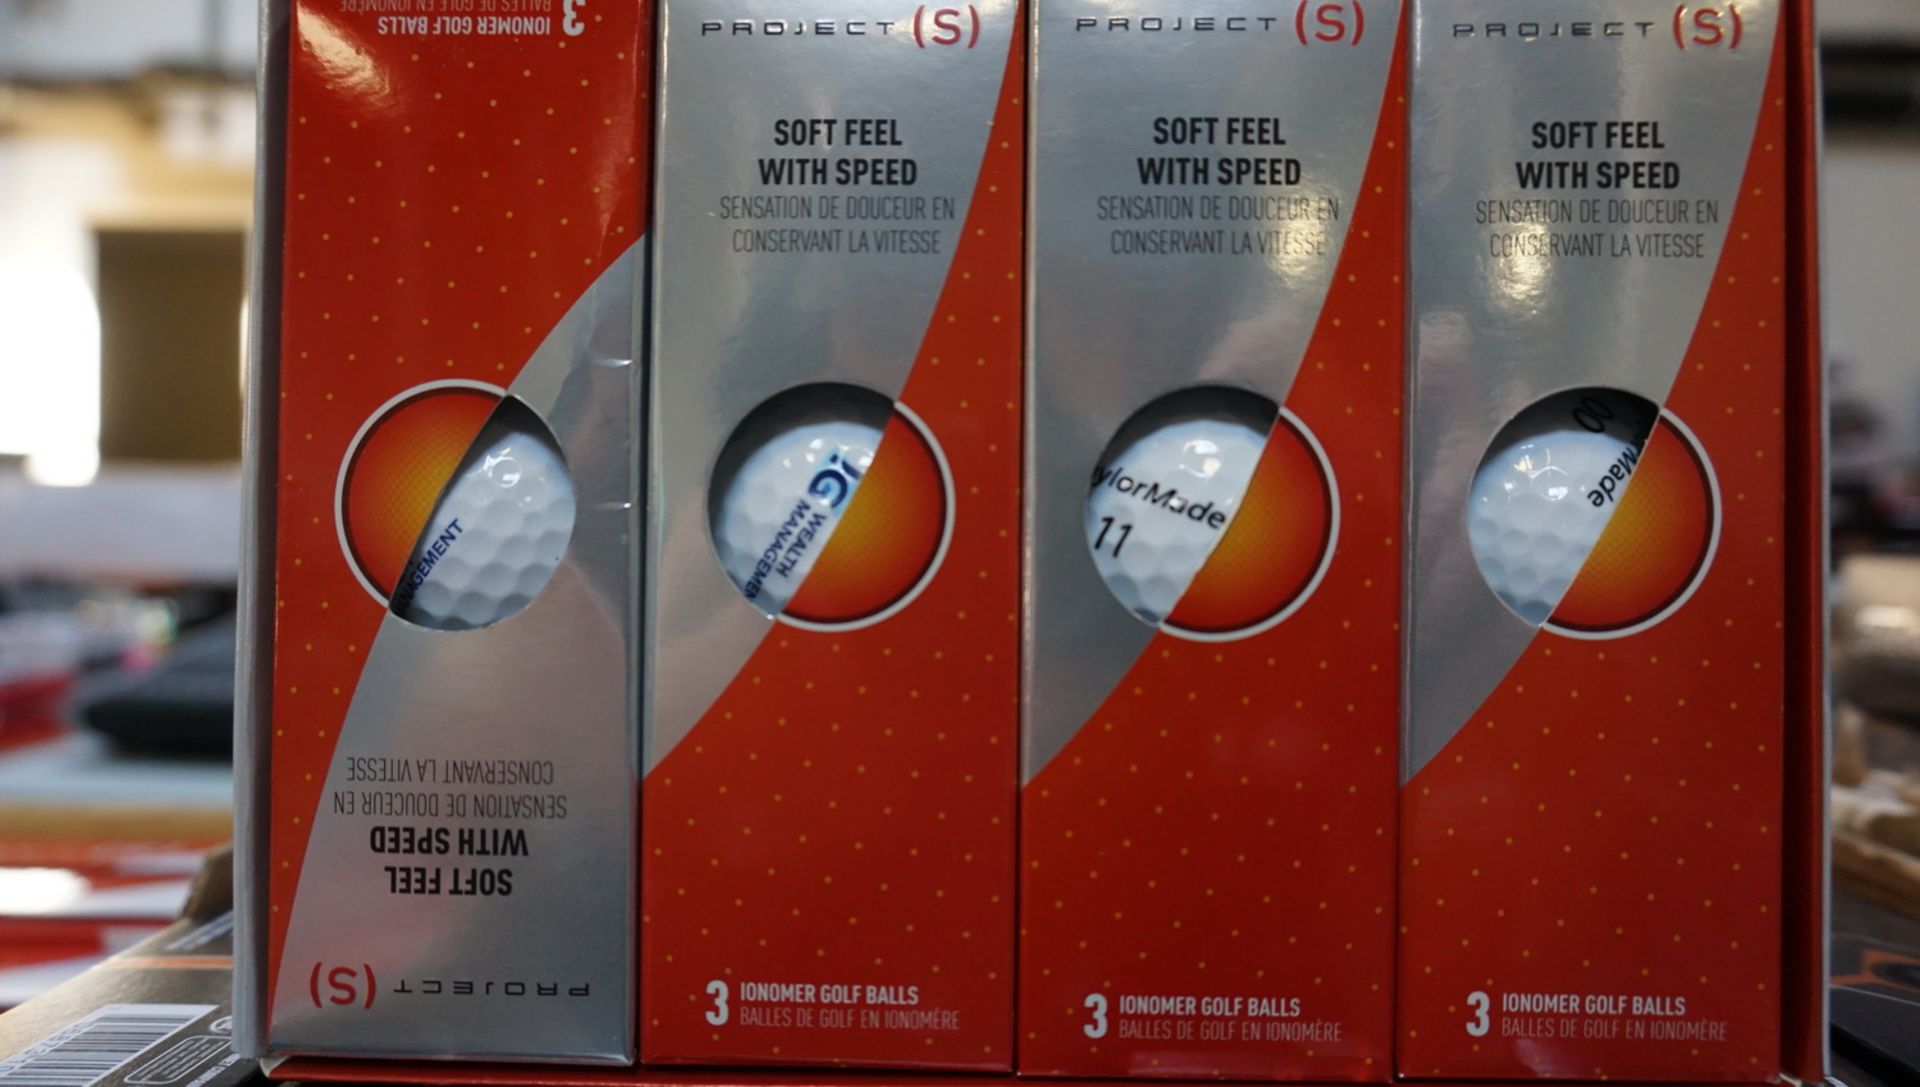 PACKS - TAYLORMADE PROJECT (S) GOLF BALLS - BRANDED (12 BALLS / PACK) (120 BALLS TOTAL) - Image 2 of 2